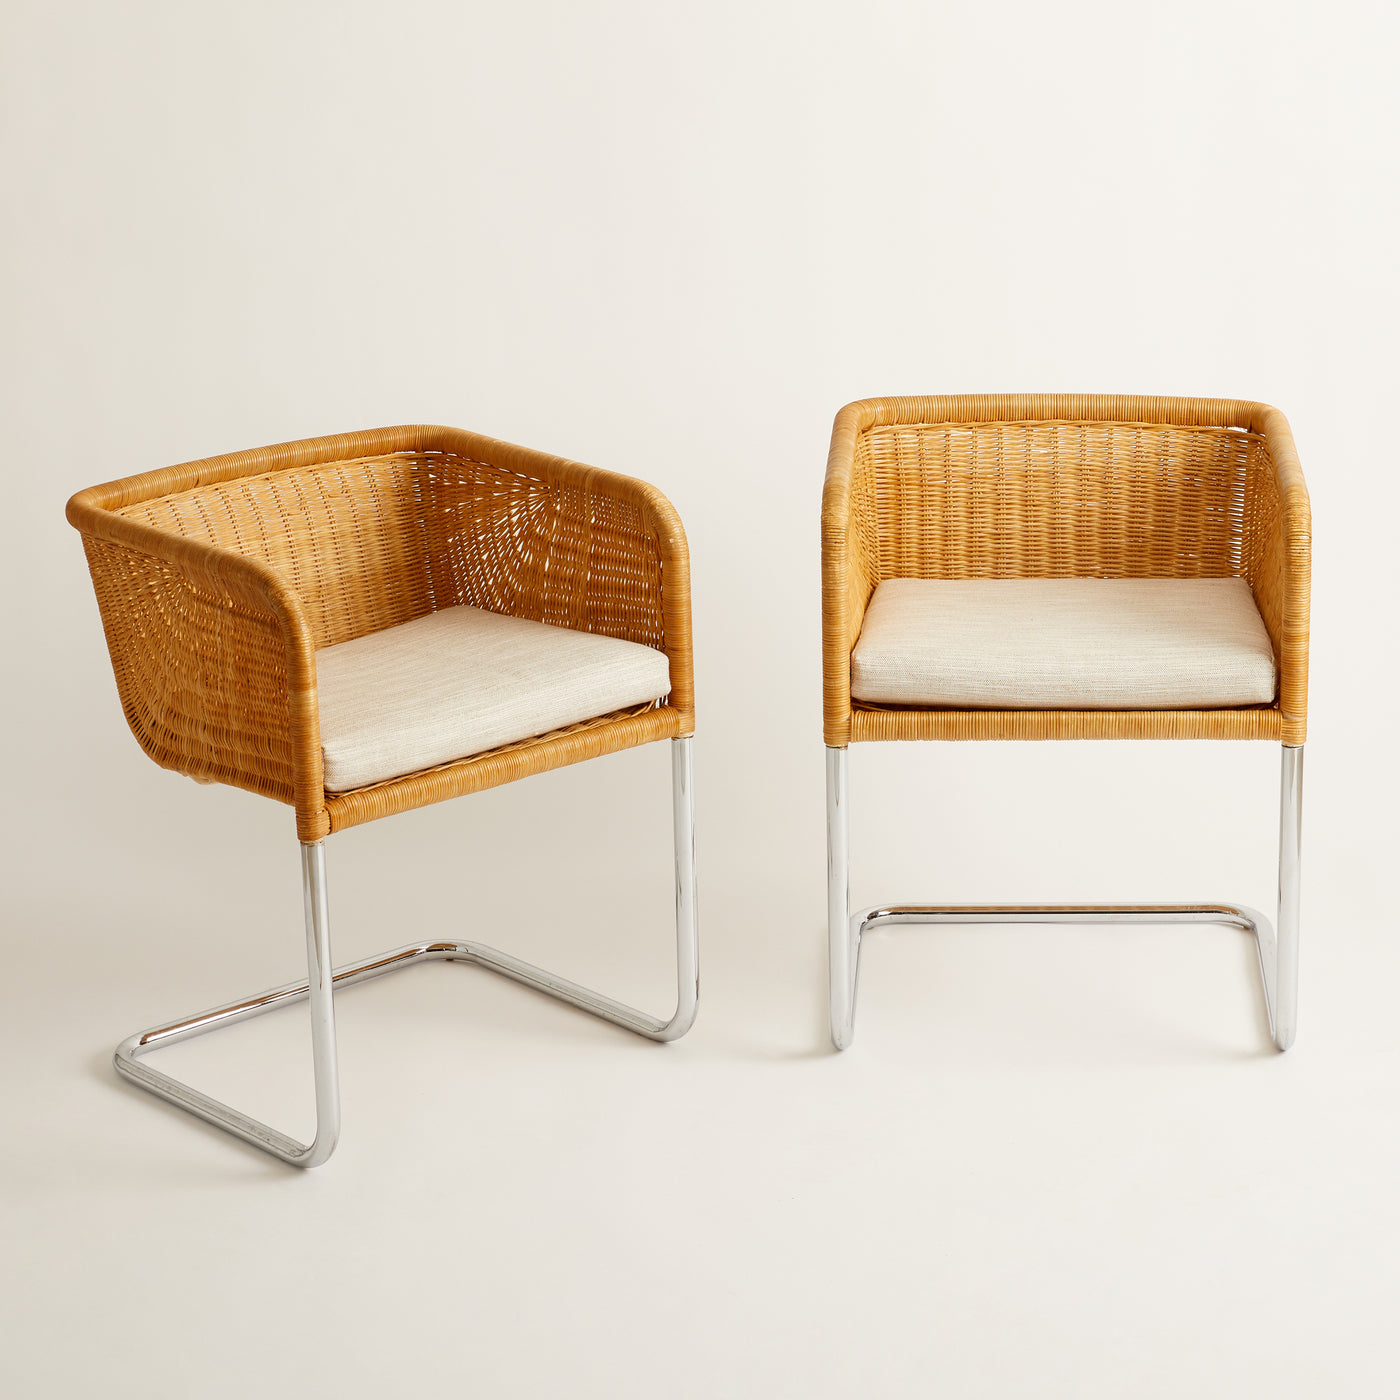 Wicker & Chrome Cantilever Dining Chairs